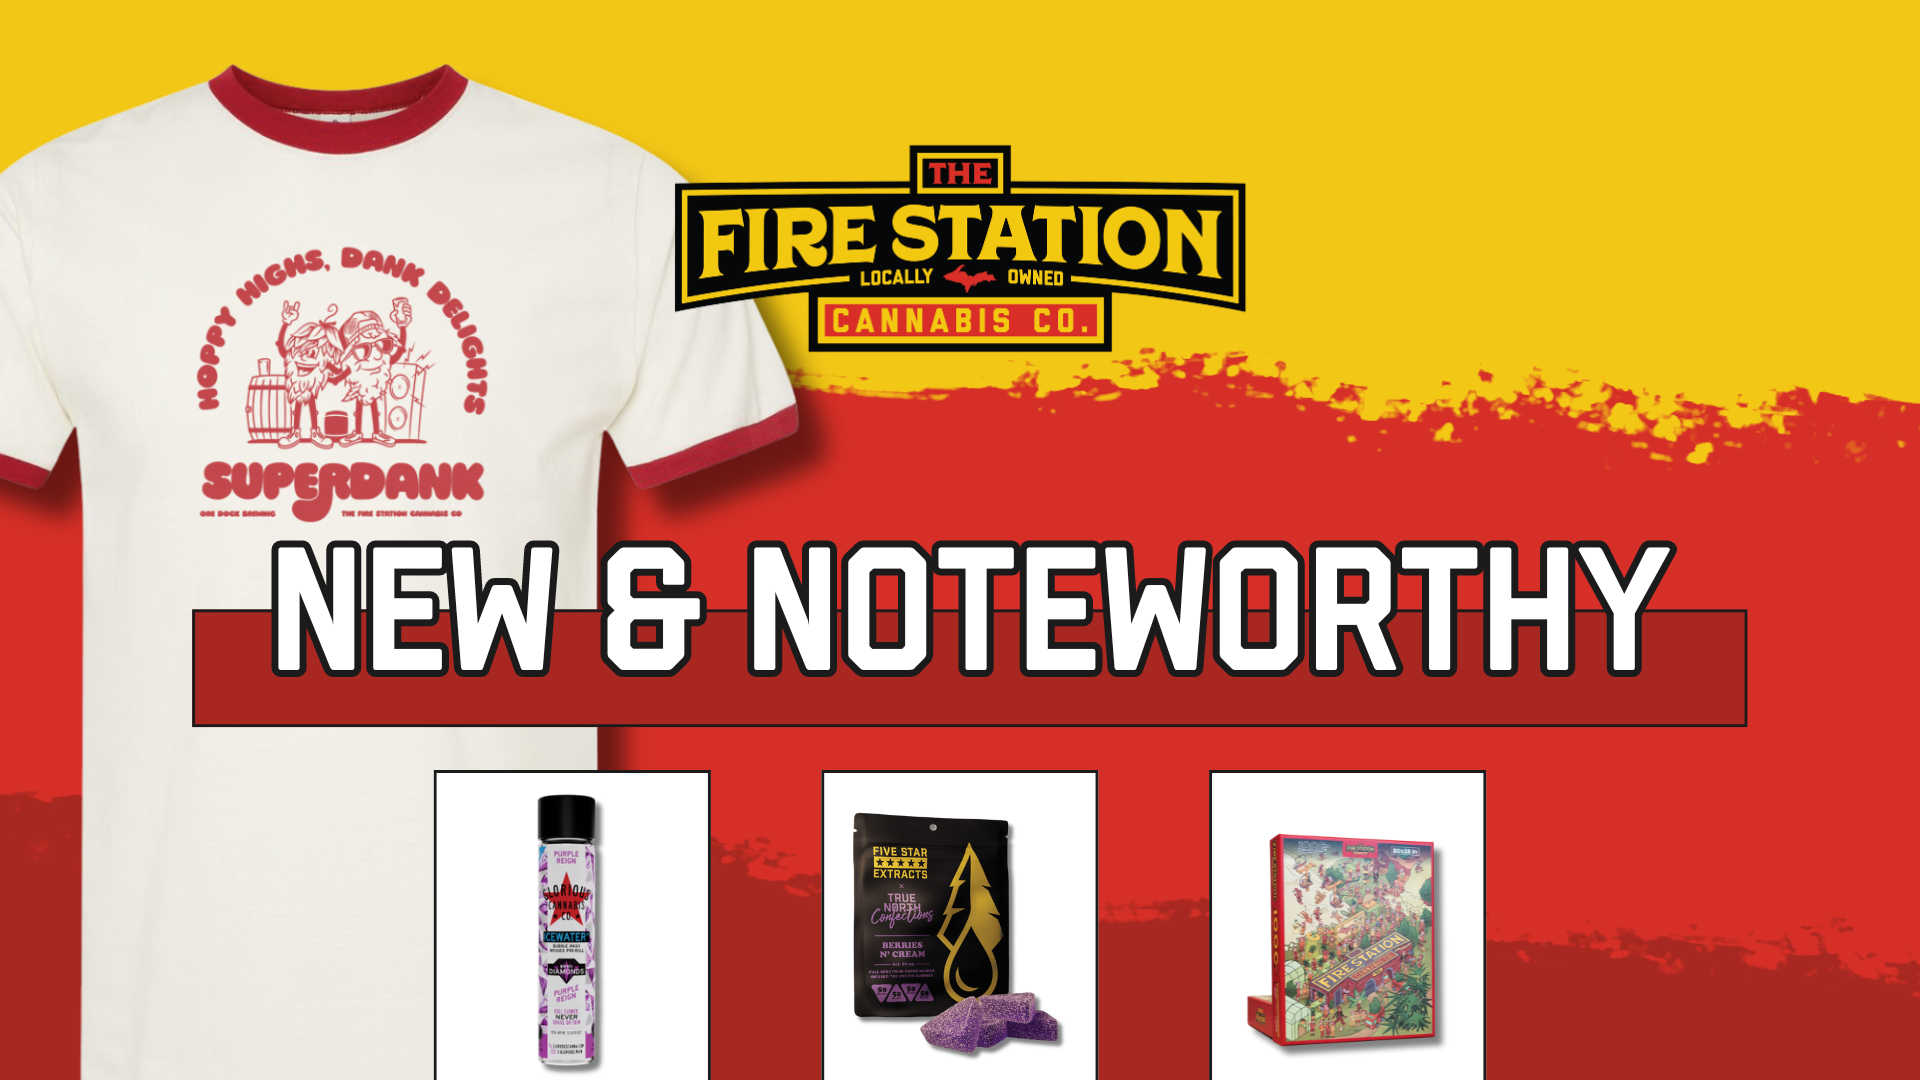 New and noteworthy products this 420 at The Fire Station Cannabis Company